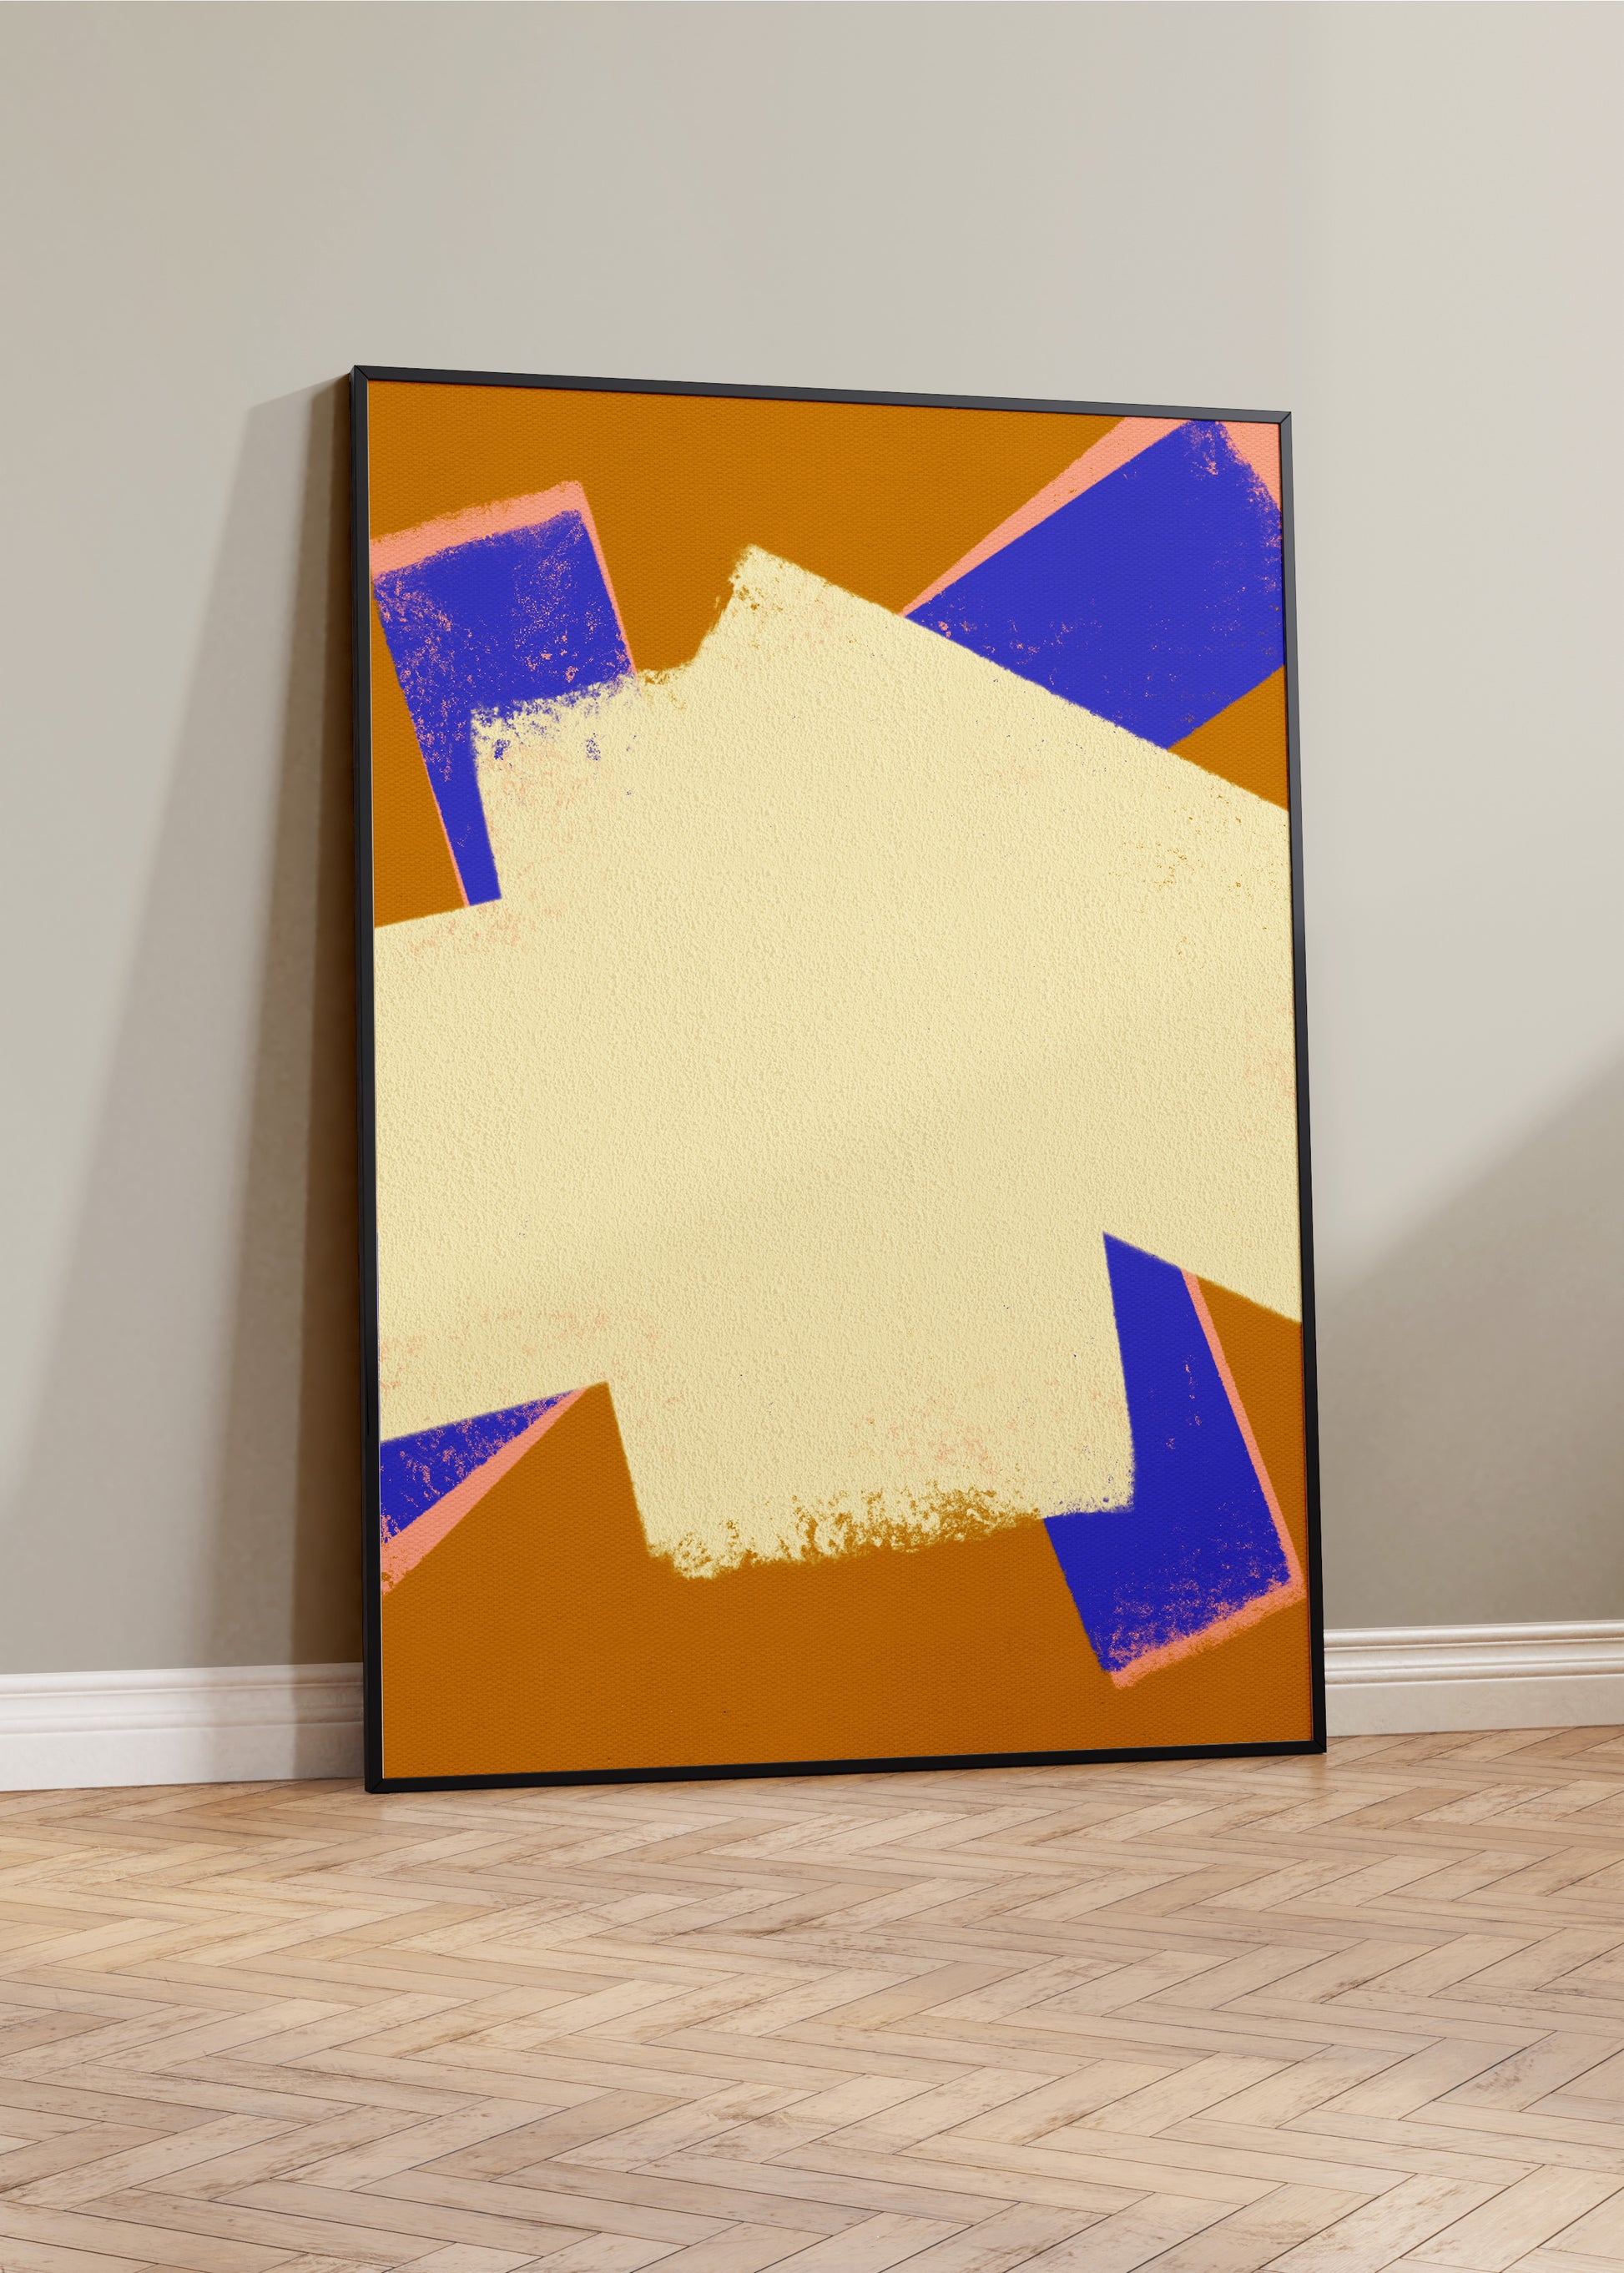 Colorful digital modern art print that uses expressive strokes and vibrant colors to create a playful and modern minimalist composition for your interior design and home wall decor projects.  Colors: ochre, royal purple, apricot, cream Available in sizes (inches): Available in sizes (inches): 8x10, 12x16, 16x20, 18x24, 20x28, 24x32, A1, 24x36, 30x40